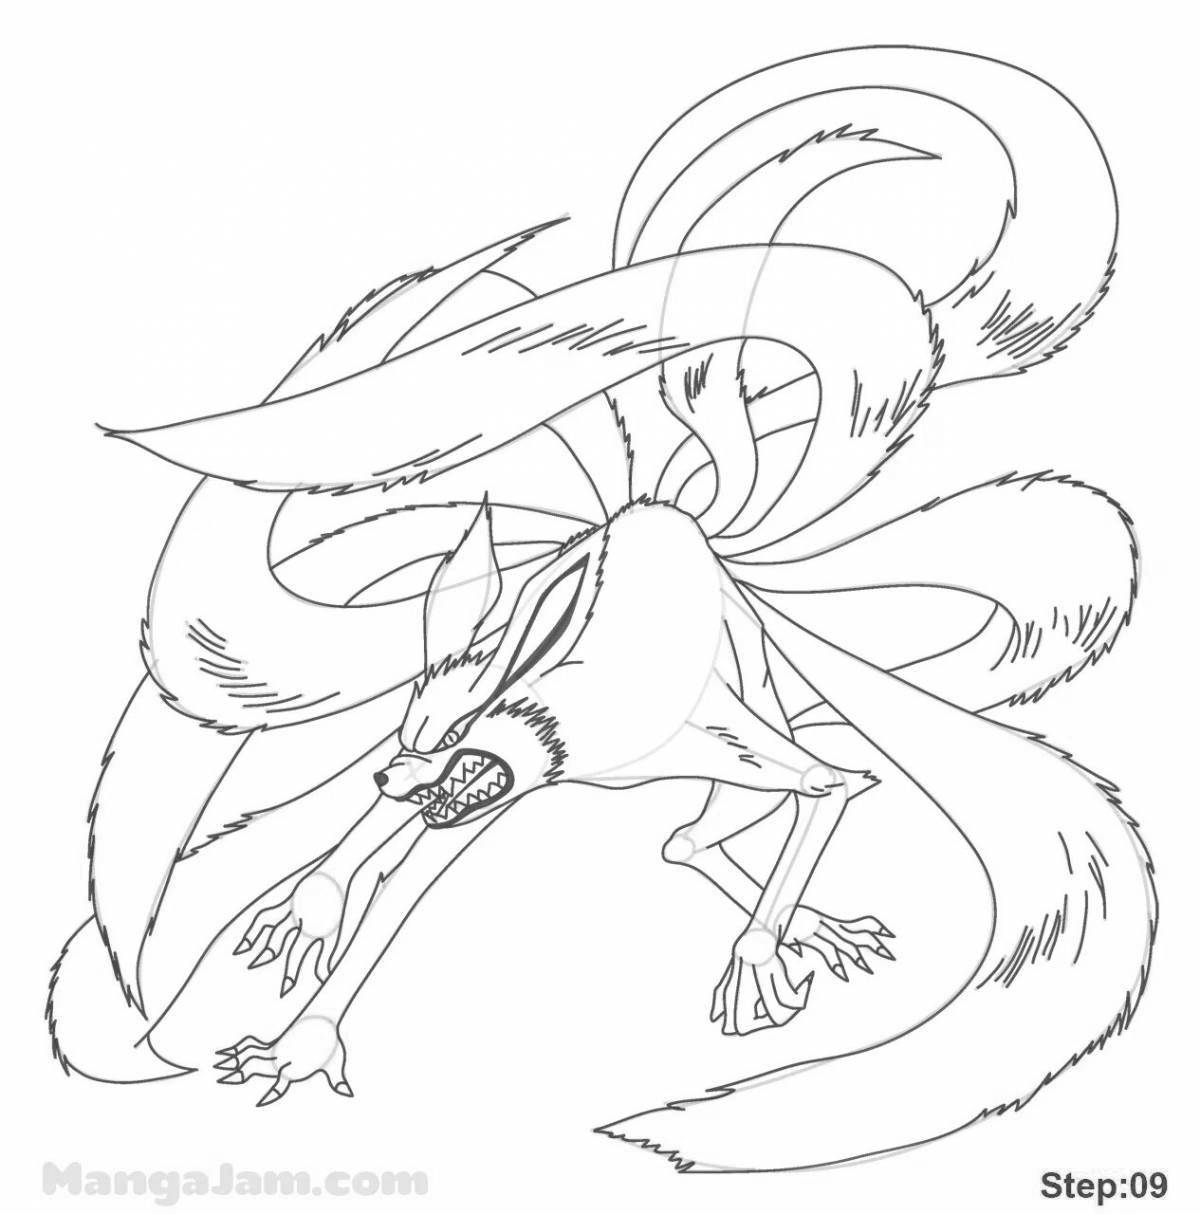 Rampant nine-tailed fox coloring page